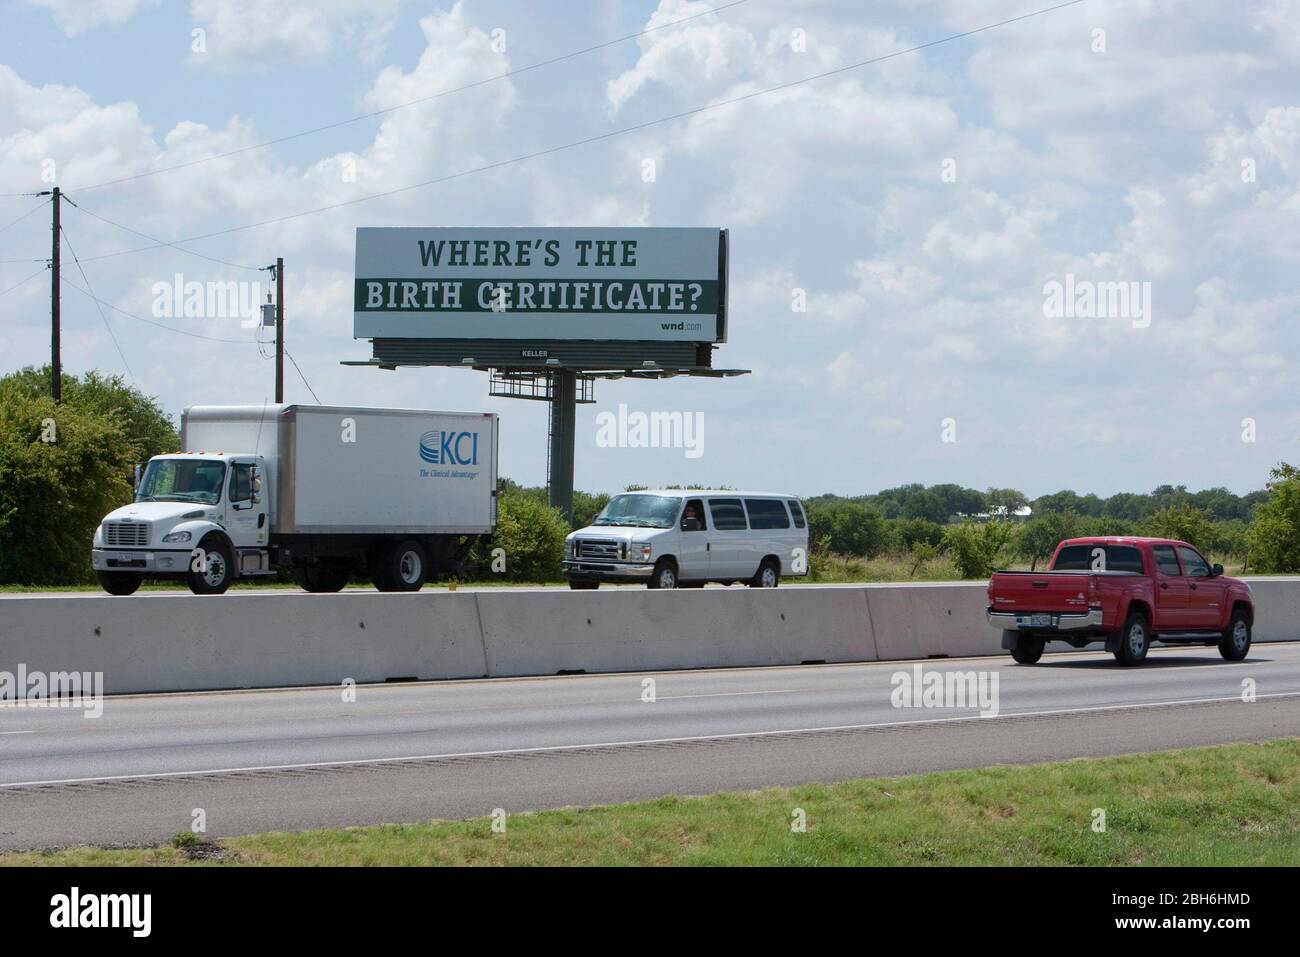 Bruceville-Eddy, Texas USA, August 18, 2009: A billboard along Interstate 35 south of Waco mounted by the conservative group WND.com questions the validity of U.S. President Barack Obama's birth certificate. The effort is being coordinated nationwide by WorldNetDaily as part of an effort to discredit Obama's citizenship.  ©Bob Daemmrich Stock Photo